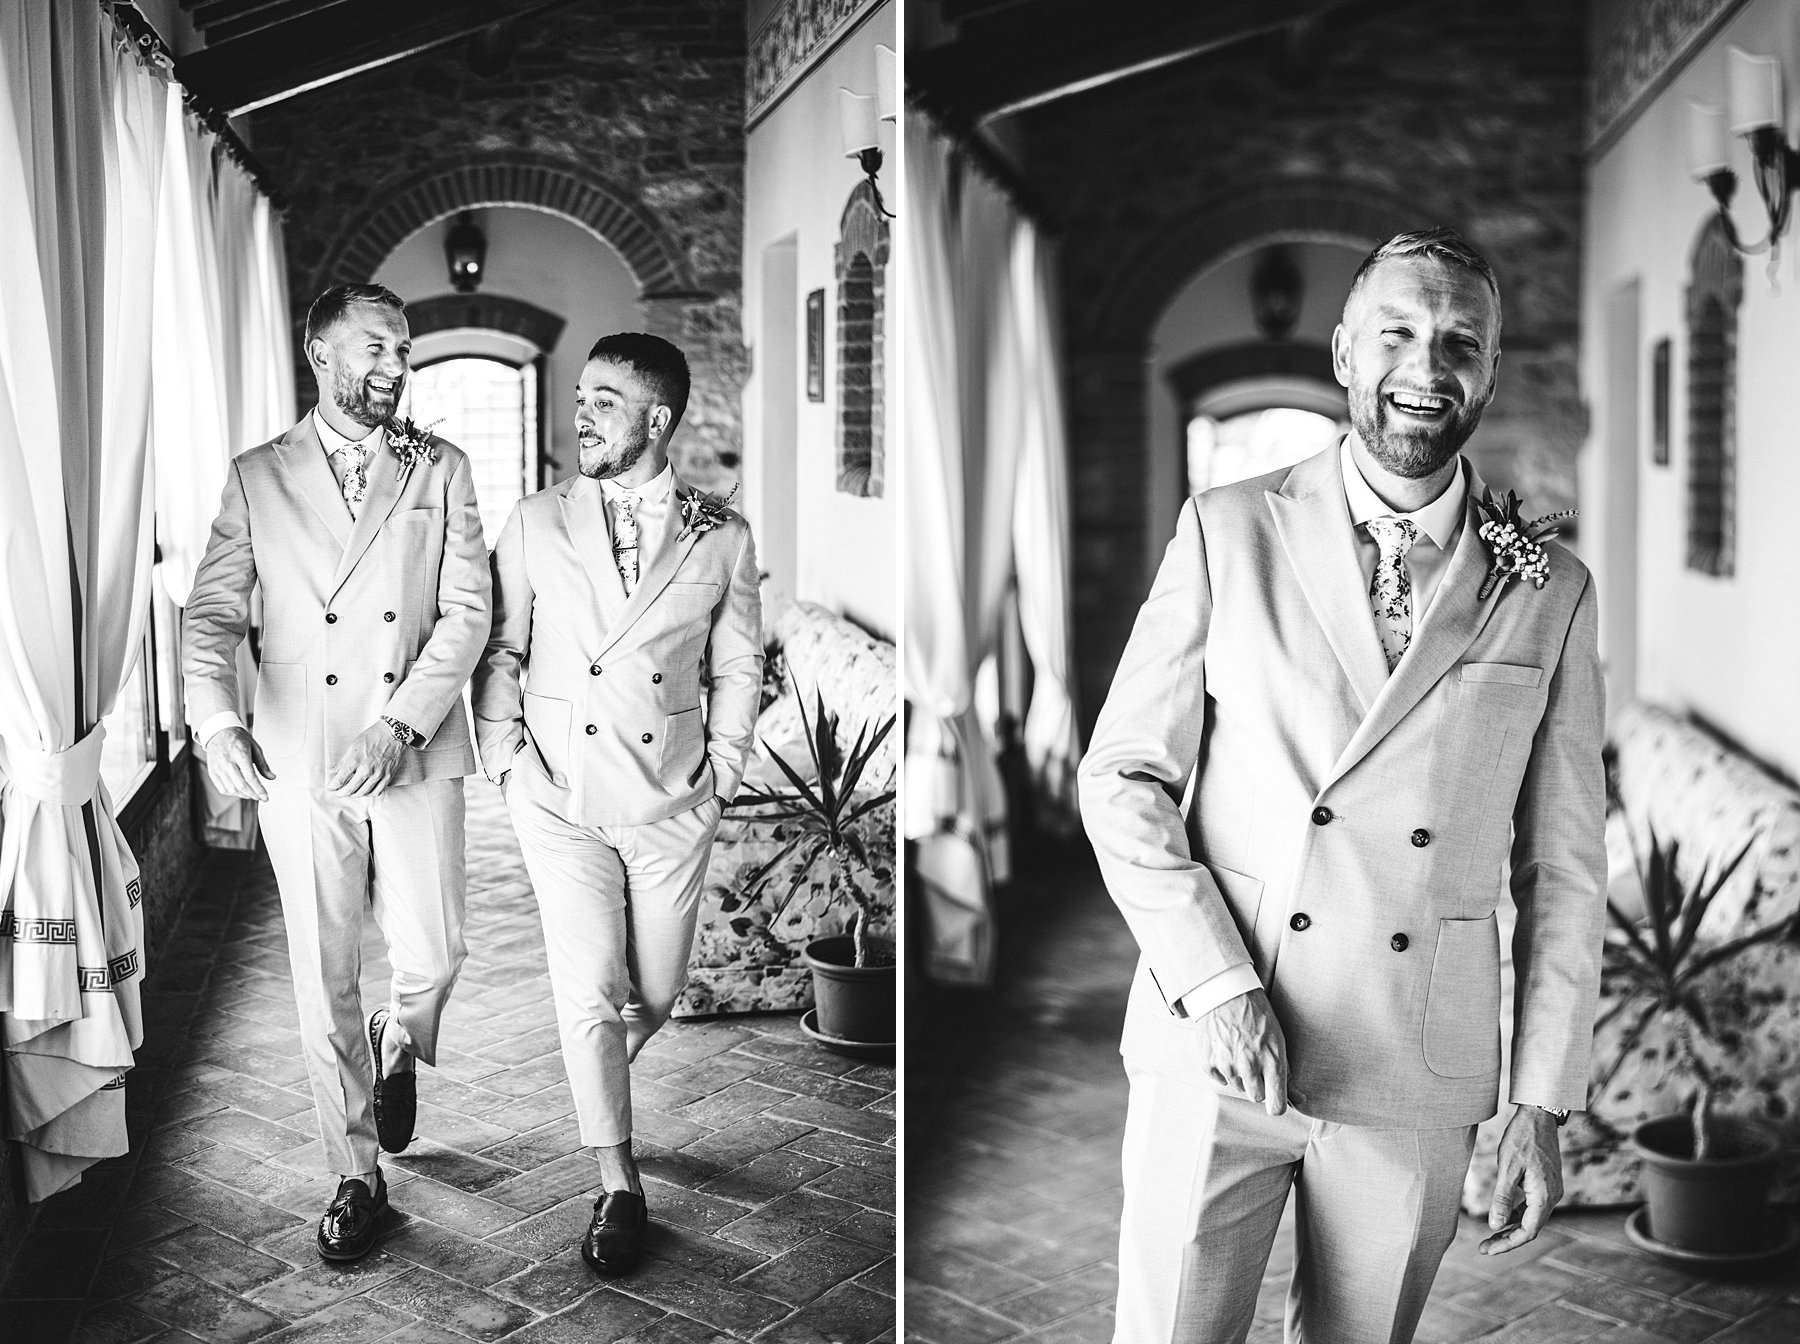 Candid and genuine wedding photo with groom Sam and groomsmen during preparation just before the intimate wedding ceremony at Villa Boscarello in Val d’Orcia